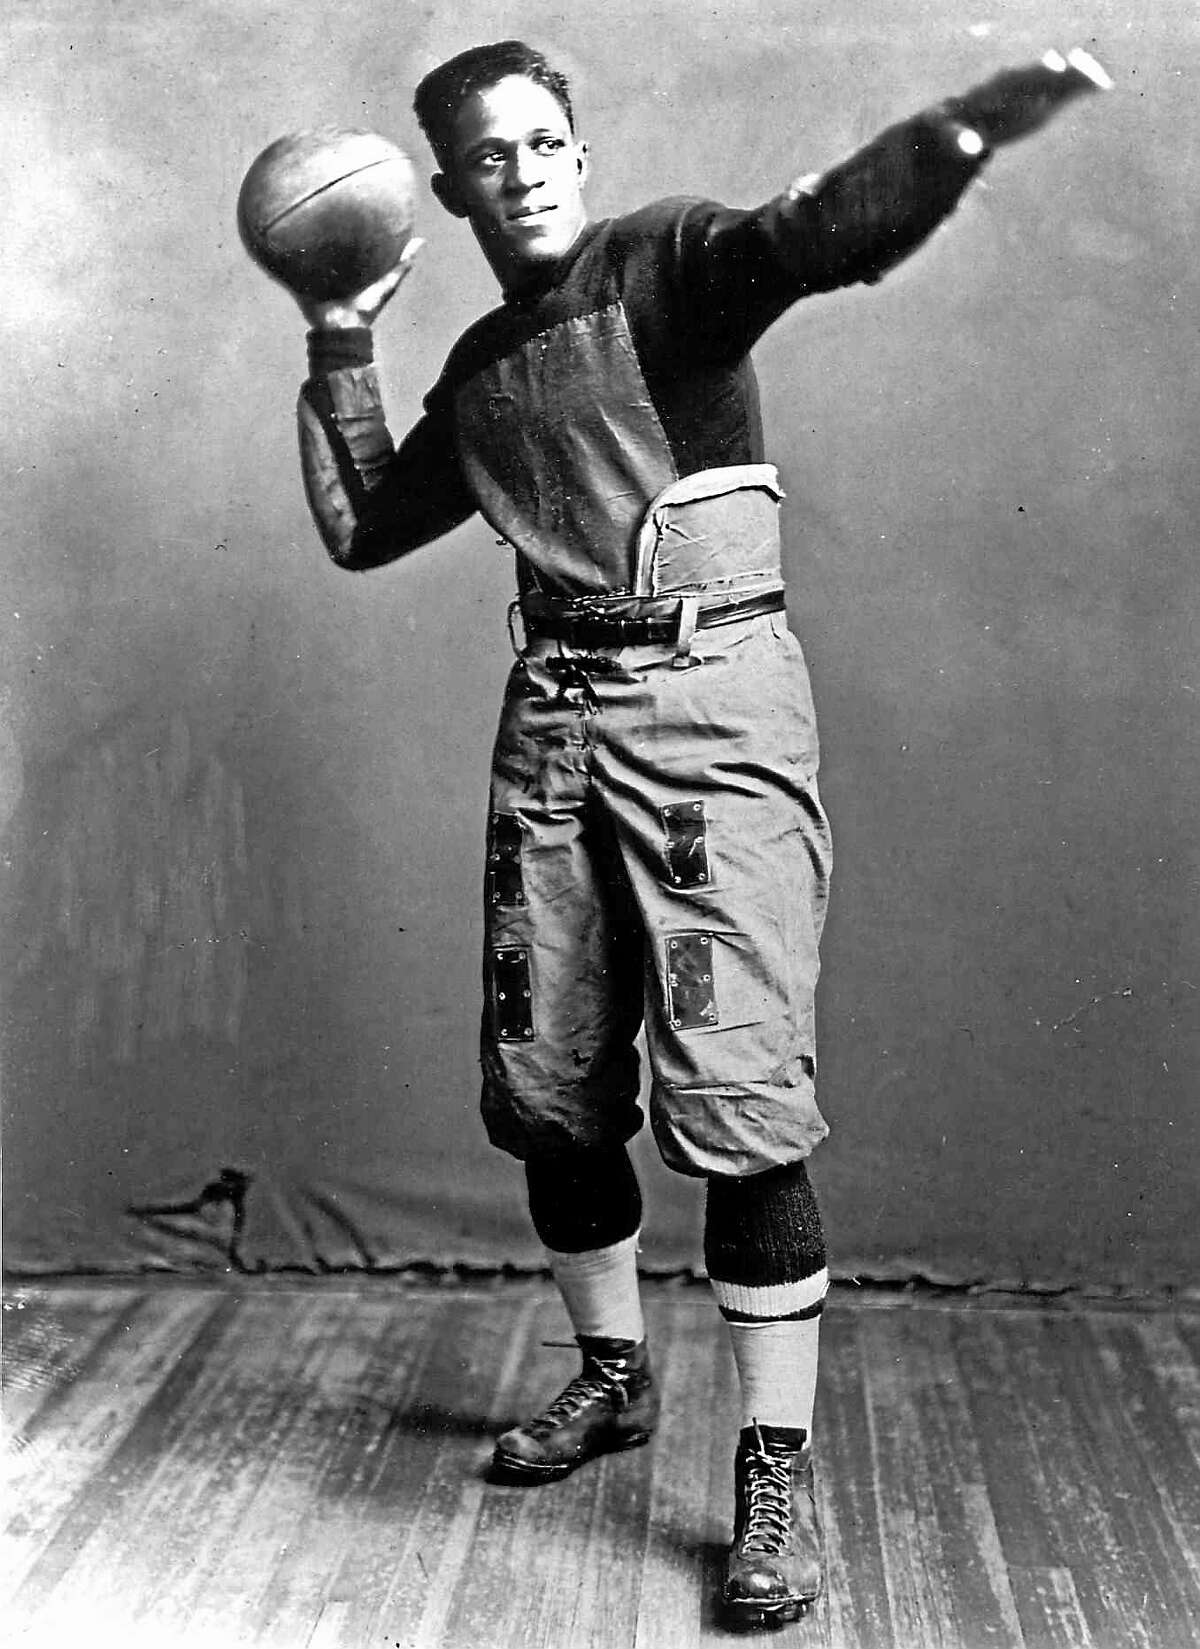 Brown’s Fritz Pollard was the first black player to play in the Yale Bowl in 1915.